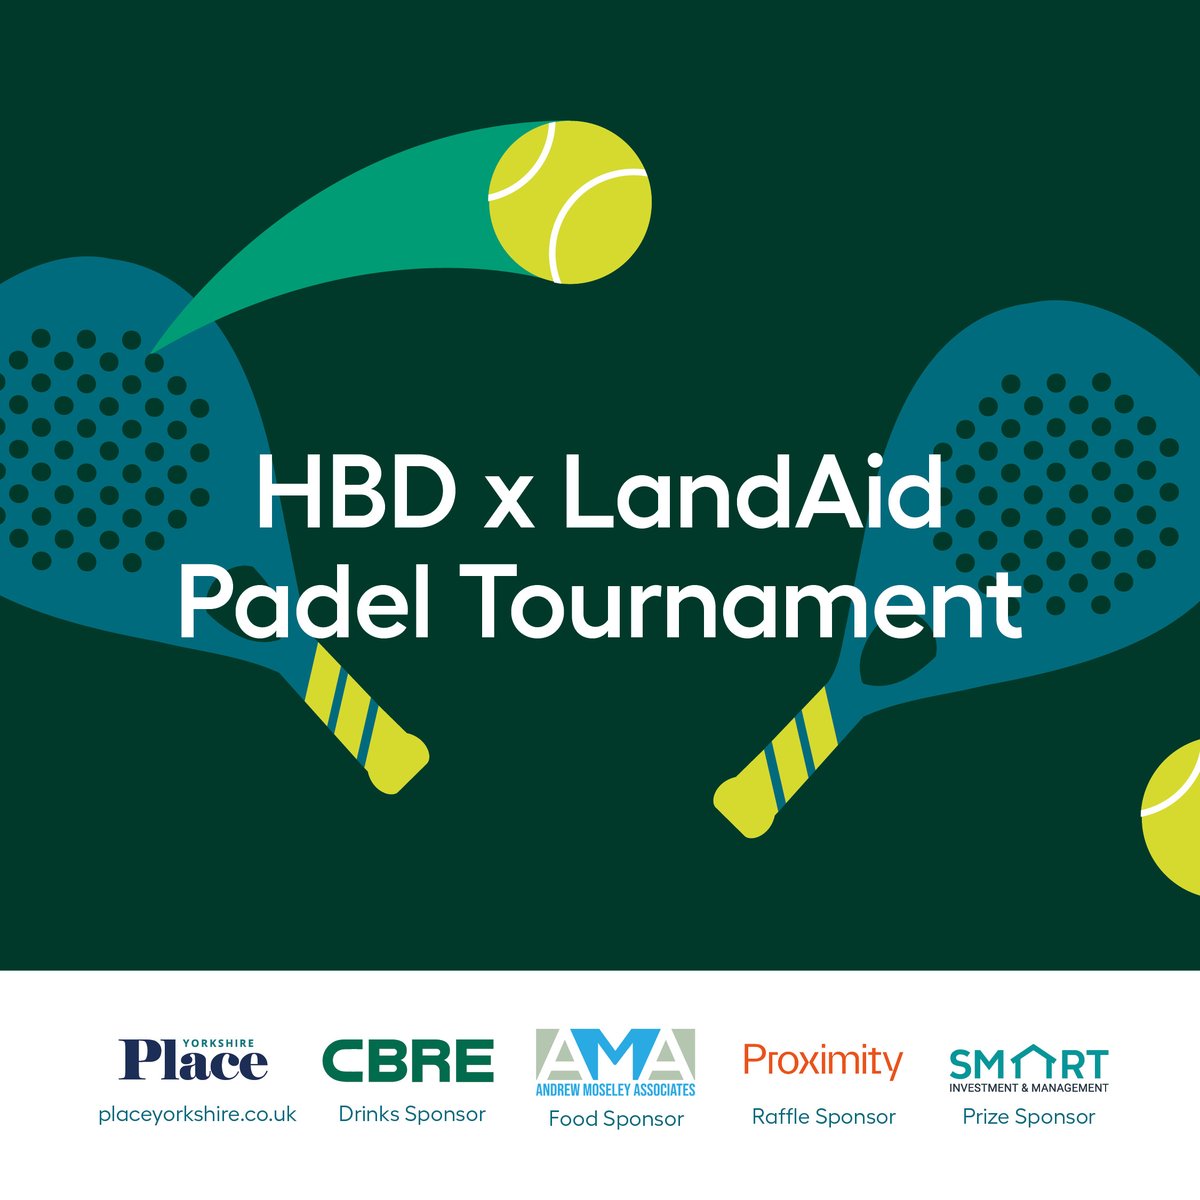 Calling all Padel fans! We’ve teamed up with LandAid and invited the property industry to put its padel skills to the test in the name of charity 🏓 Yes, our maiden HBD x LandAid padel tournament will take place on Thursday 5 September at Surge Padel in Leeds.